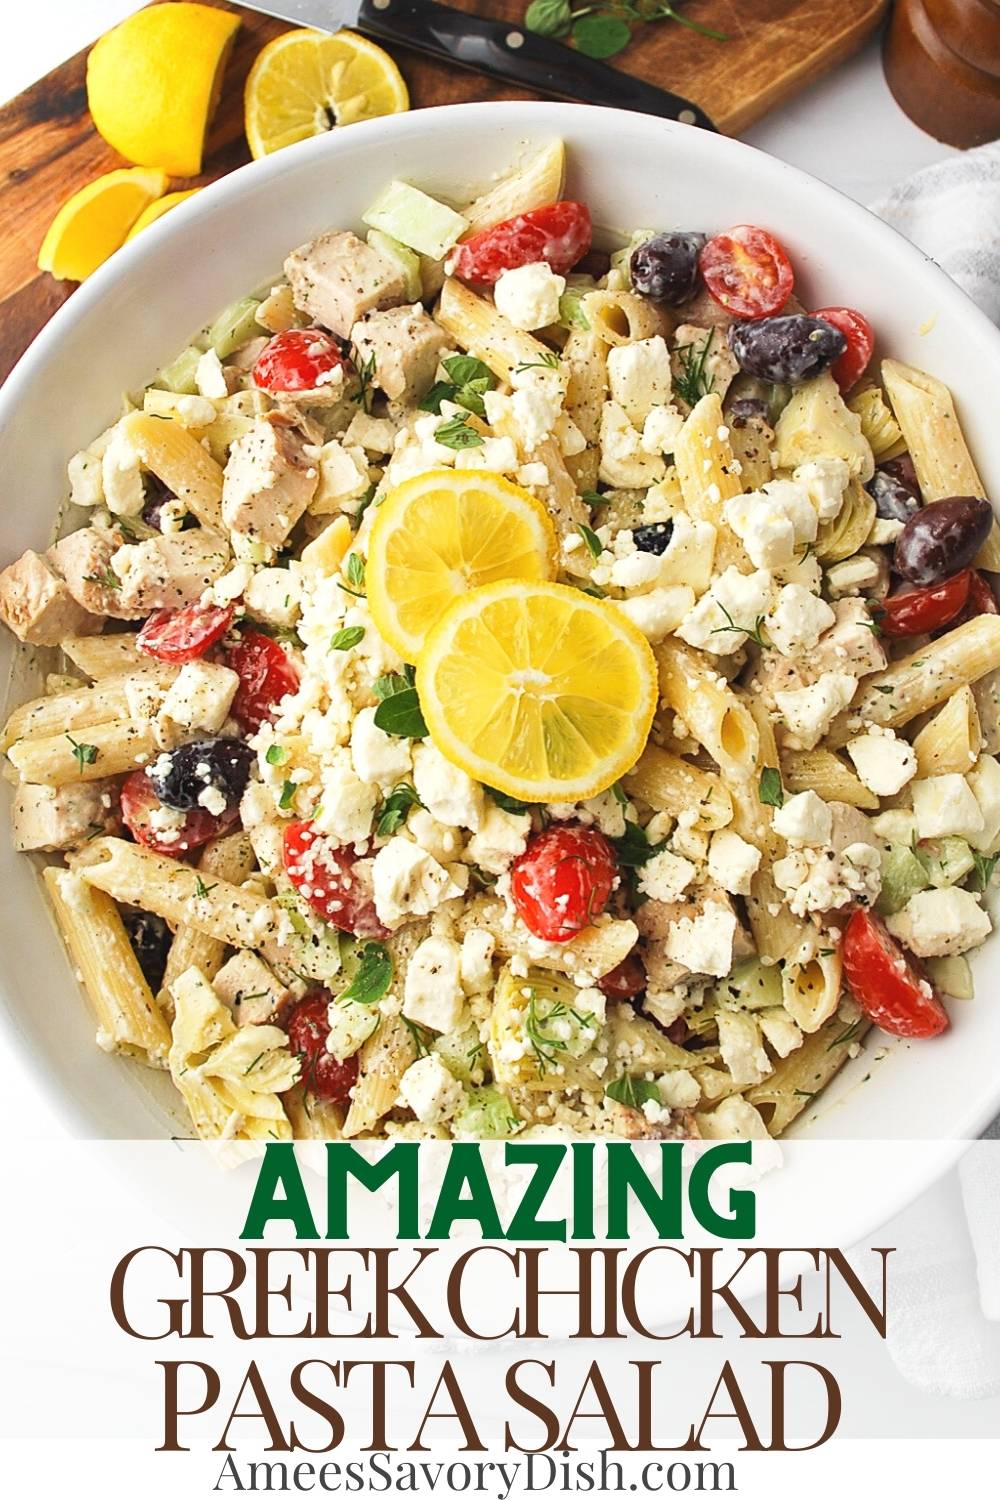 This Greek Chicken Pasta Salad features kalamata olives, cucumbers, tomatoes, and artichoke hearts tossed with penne in a tangy tzatziki-inspired dressing. via @Ameessavorydish